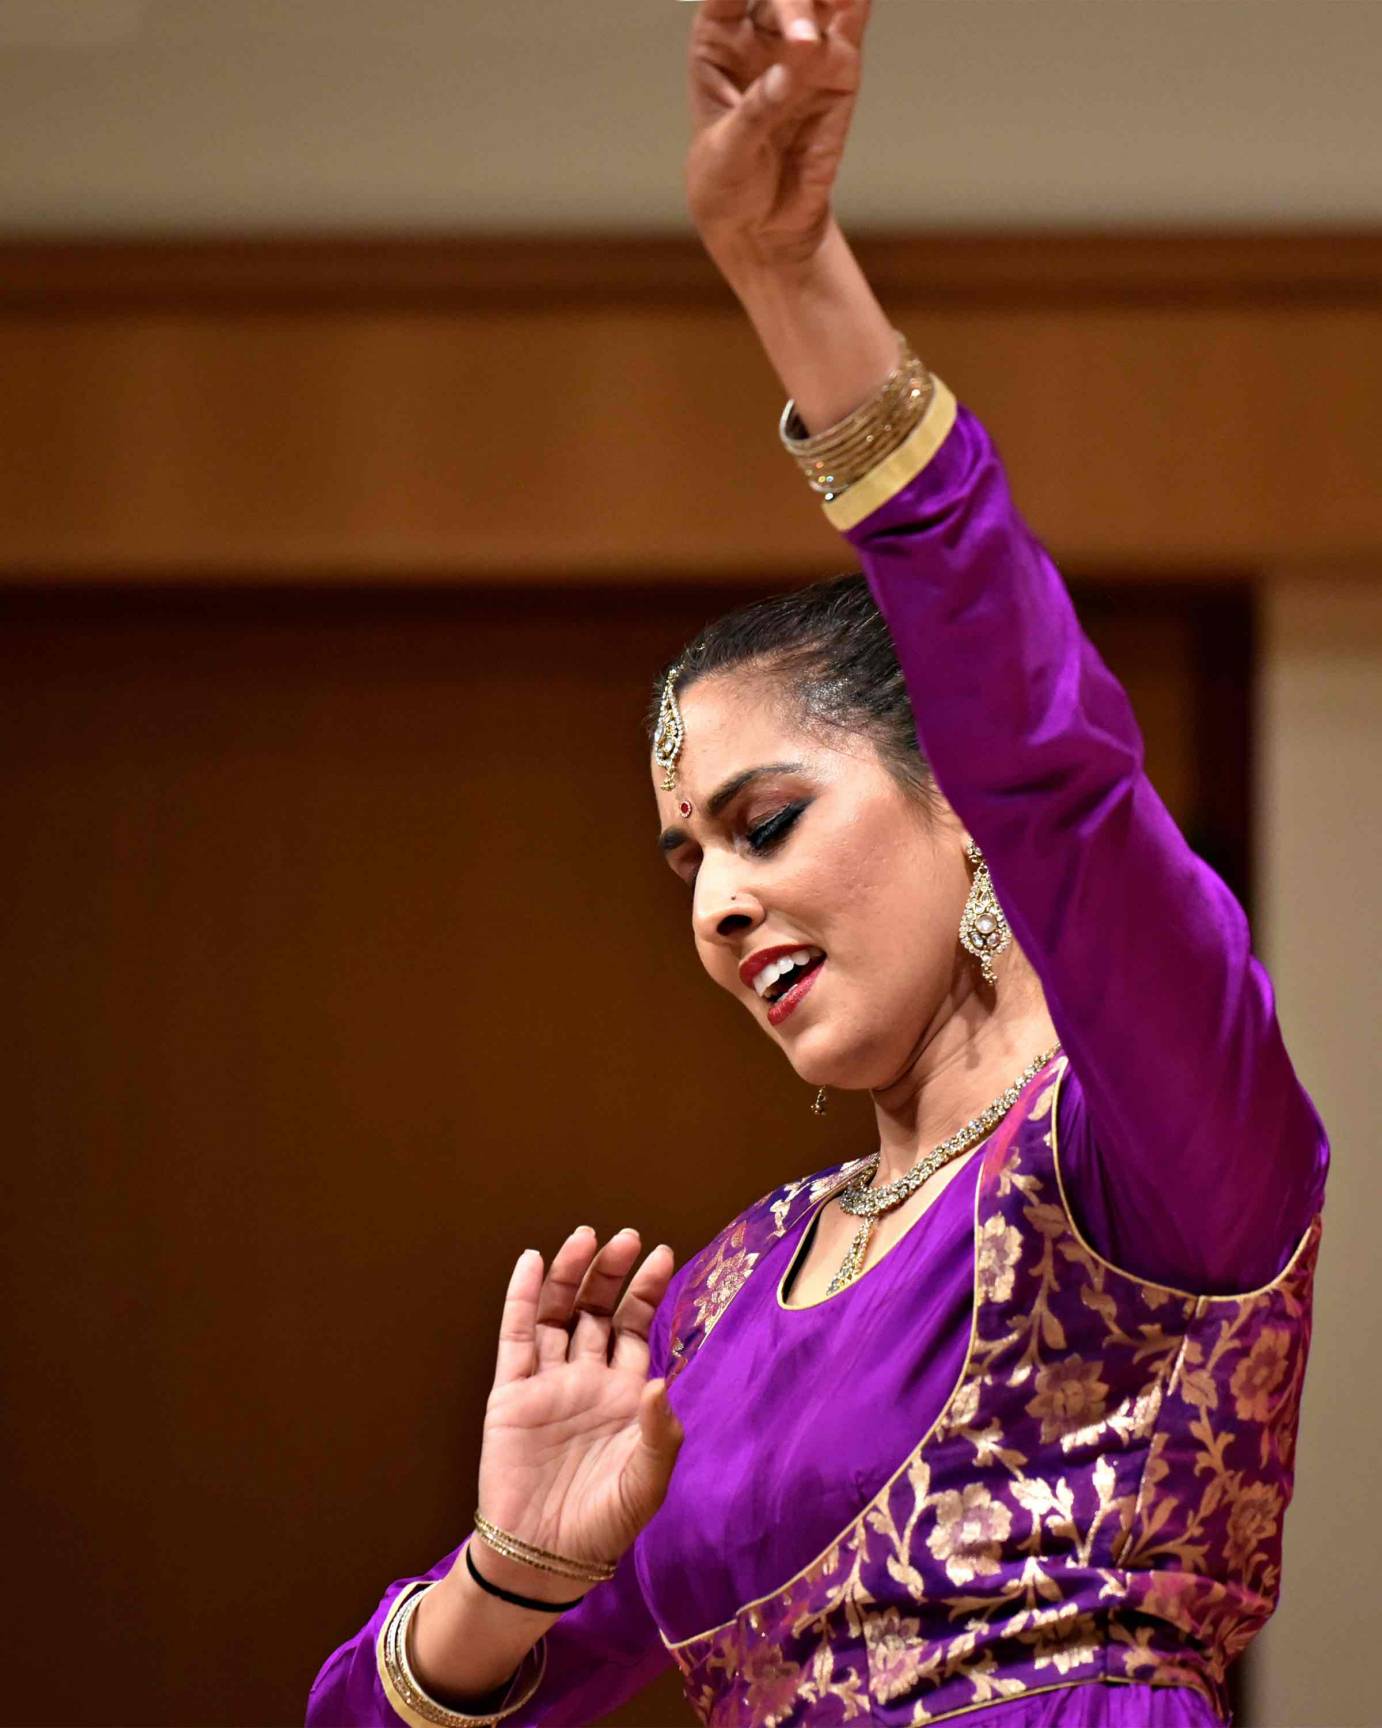 DANCE NEWS: Leela Dance Collective Raises $1 Million as First Ever  Endowment to Support Kathak Dance & Music in the U.S.